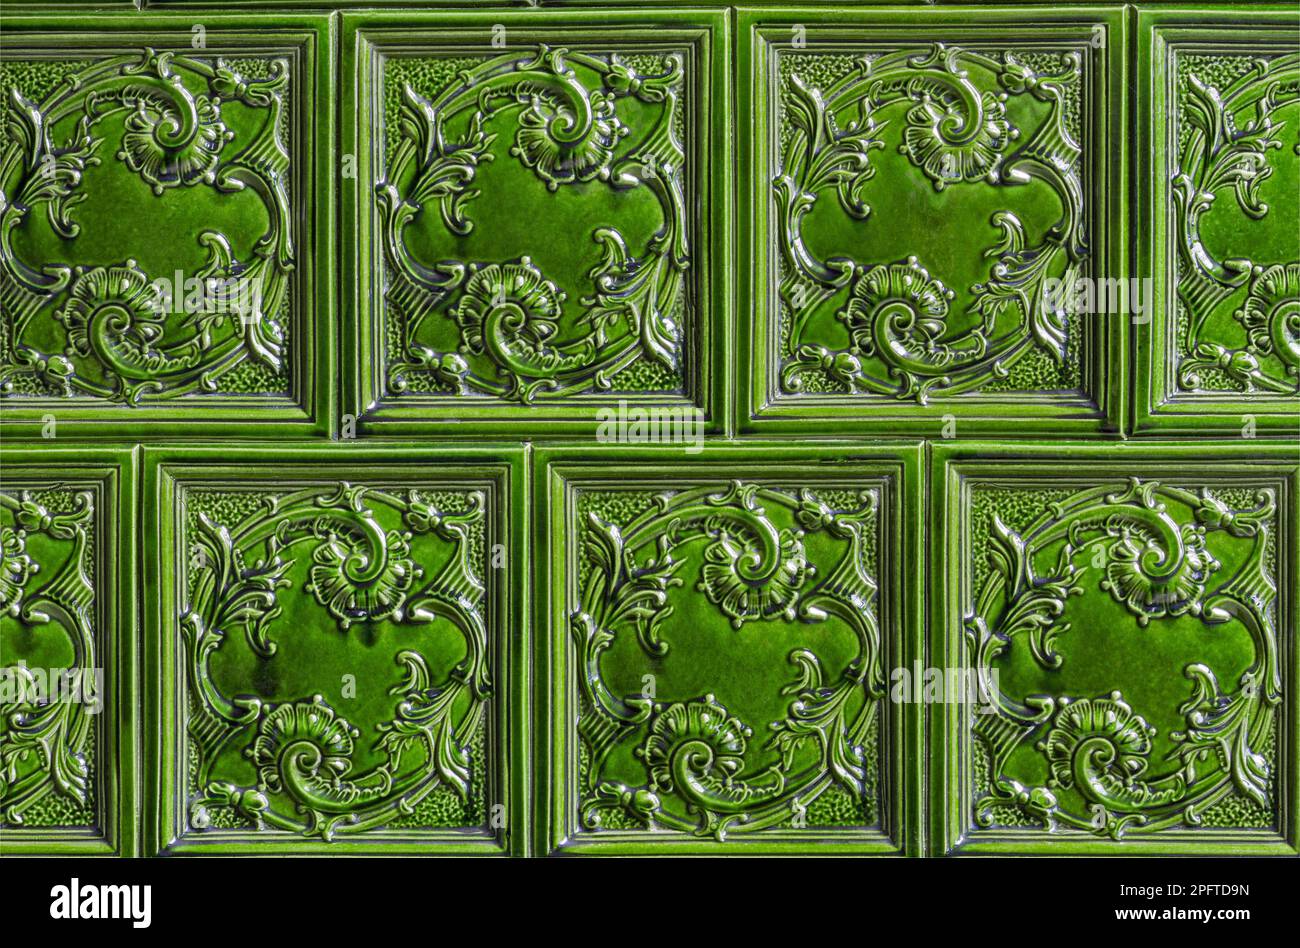 Old green tiled stove Stock Photo